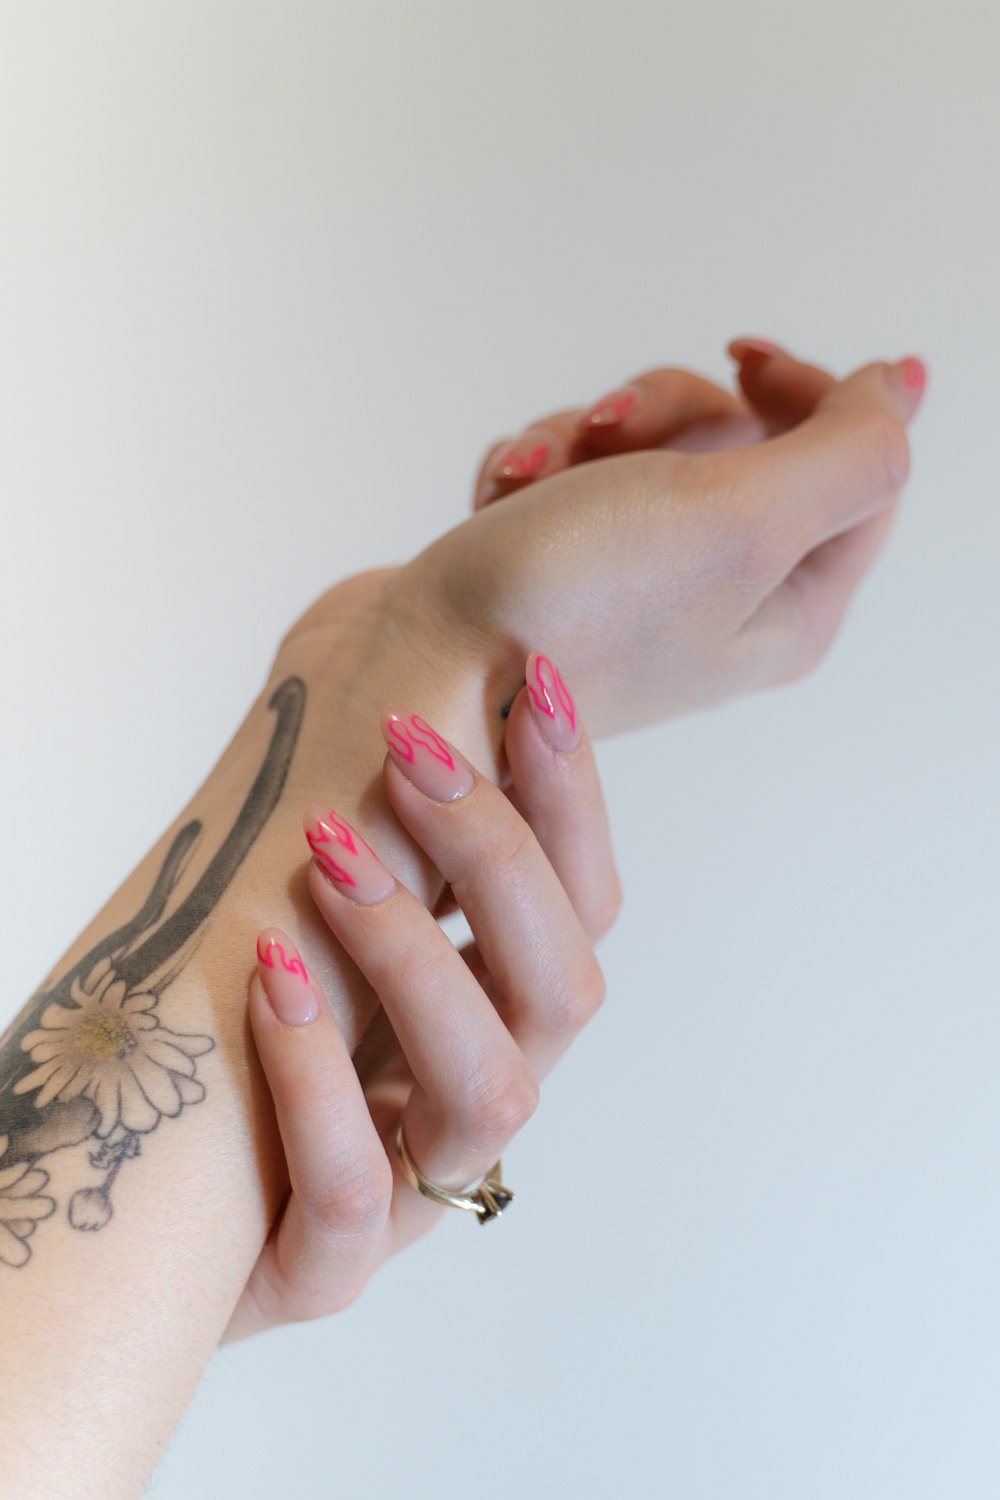 a woman's hand with pink and white nail polish